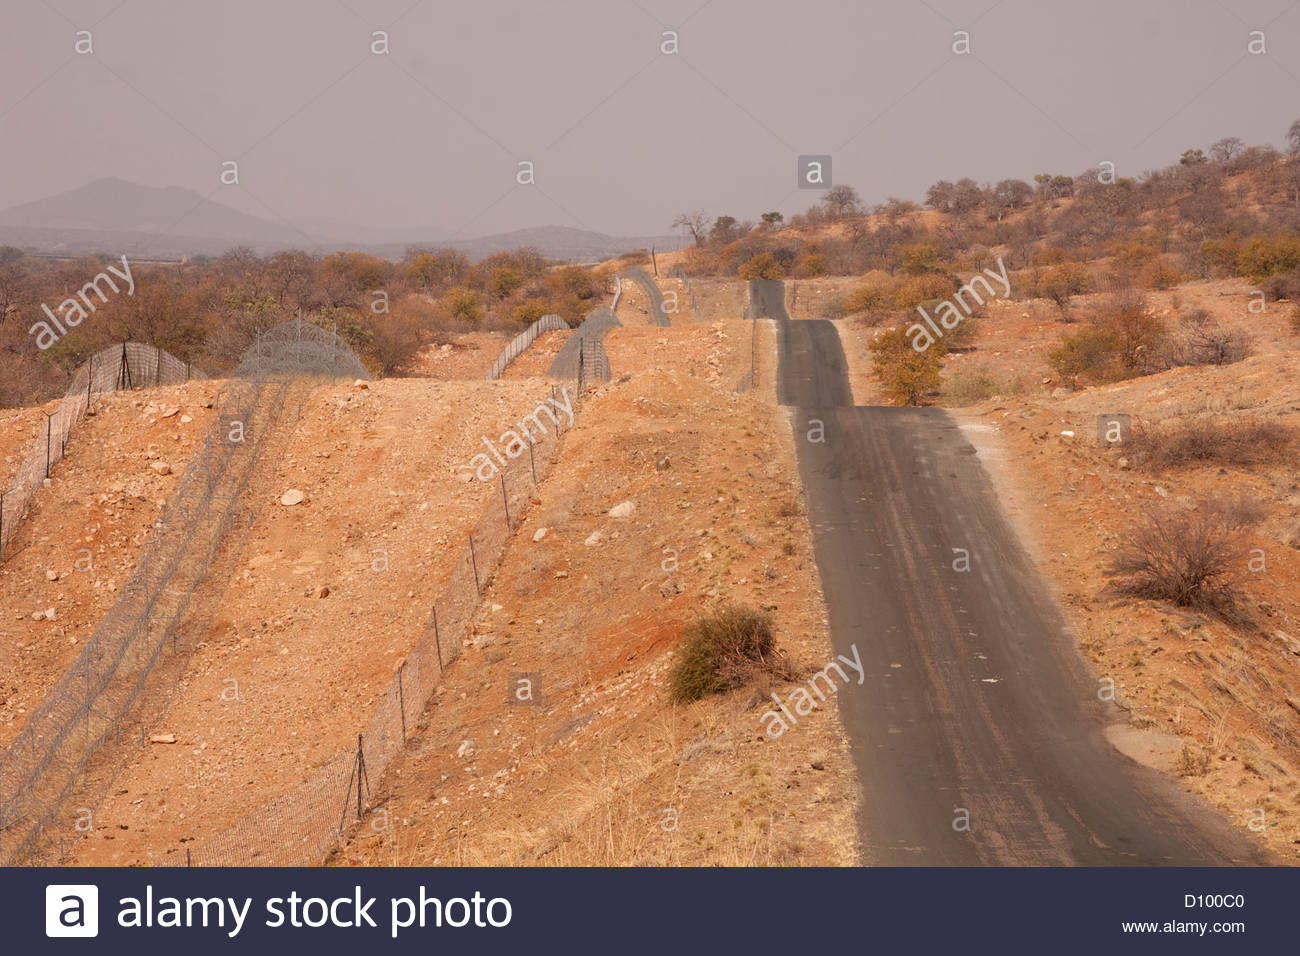 beit-bridge-border-road-and-fence-separating-zimbabwe-and-south-africa-D100C0.jpg